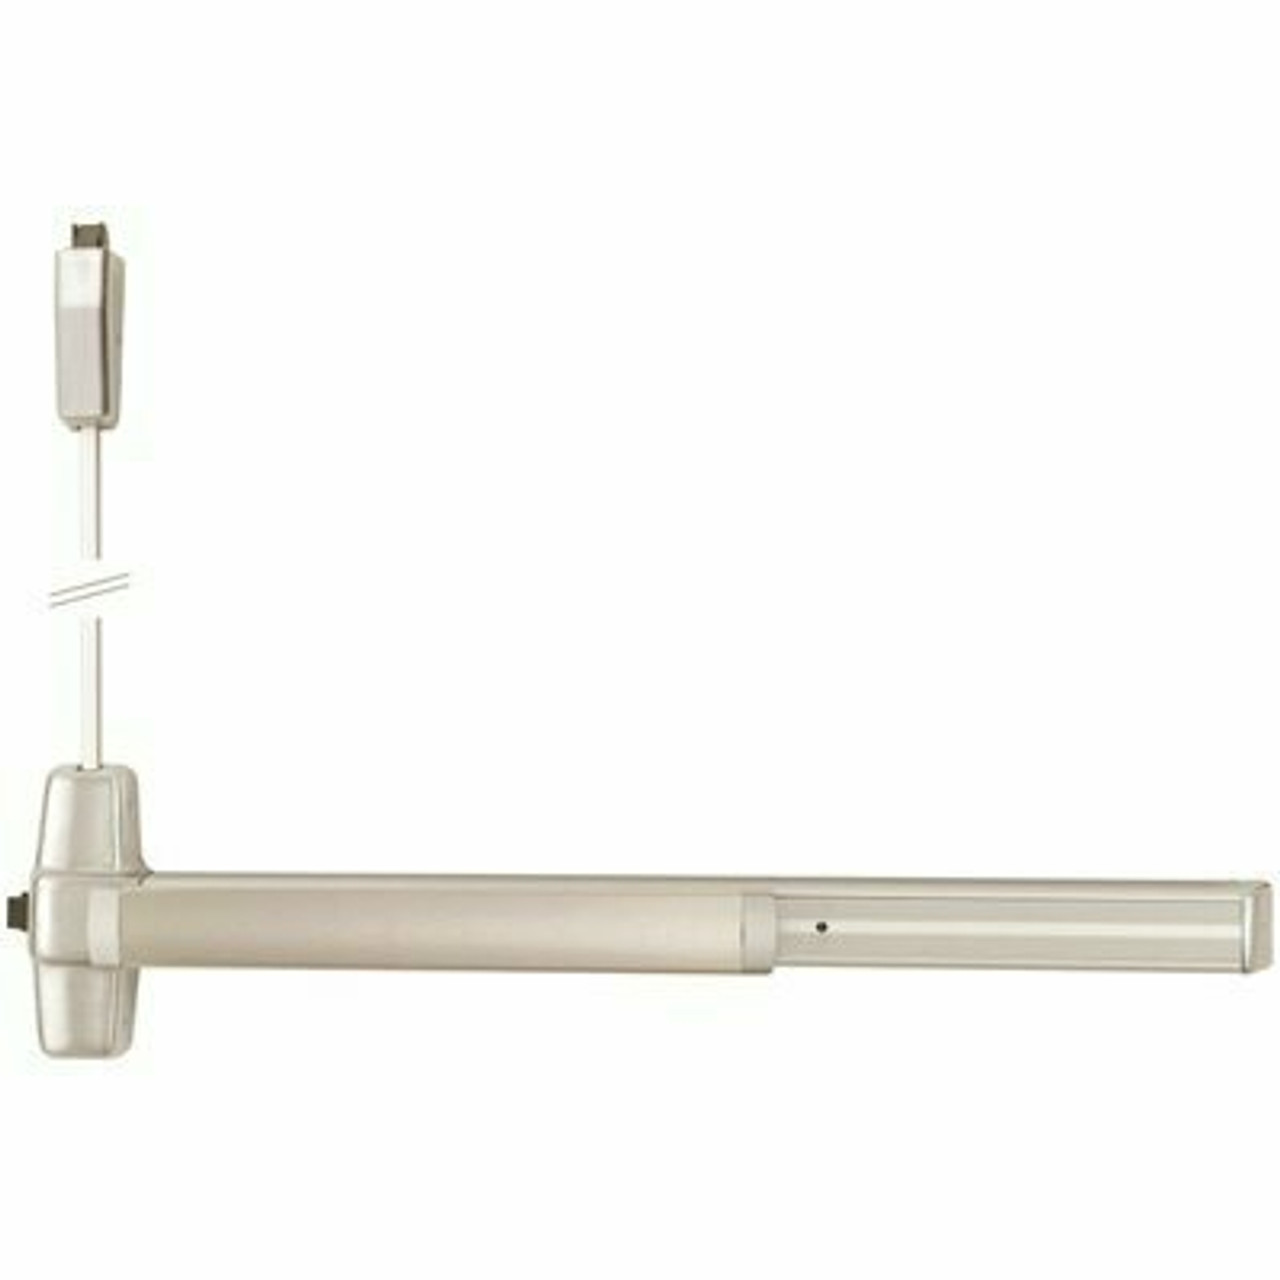 Von Duprin 99 Series Surface-Mounted Vertical Rod Exit Device With Night Latch Trim